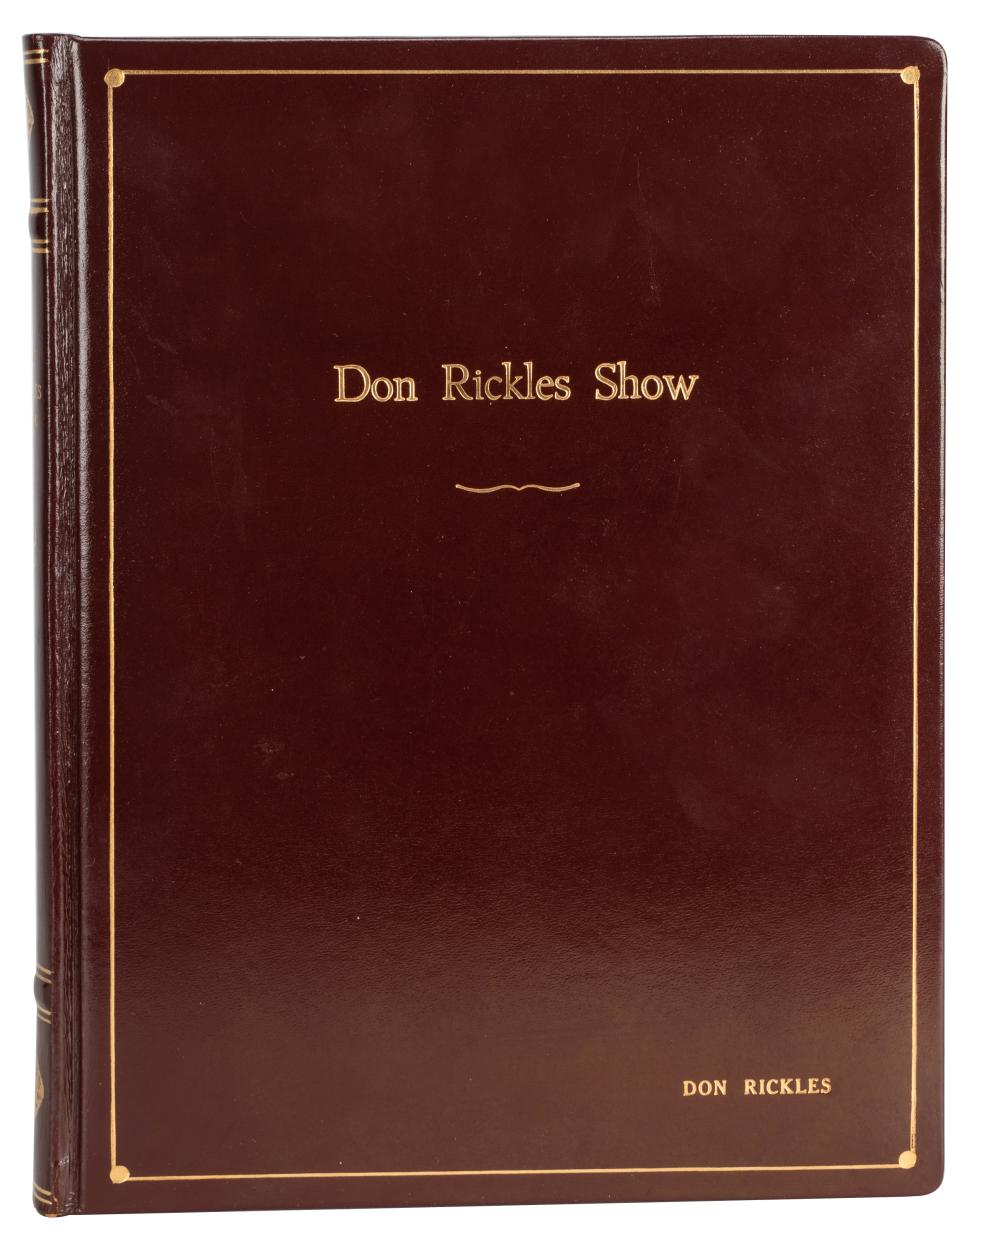 DON RICKLES: THE DON RICKLES SHOW